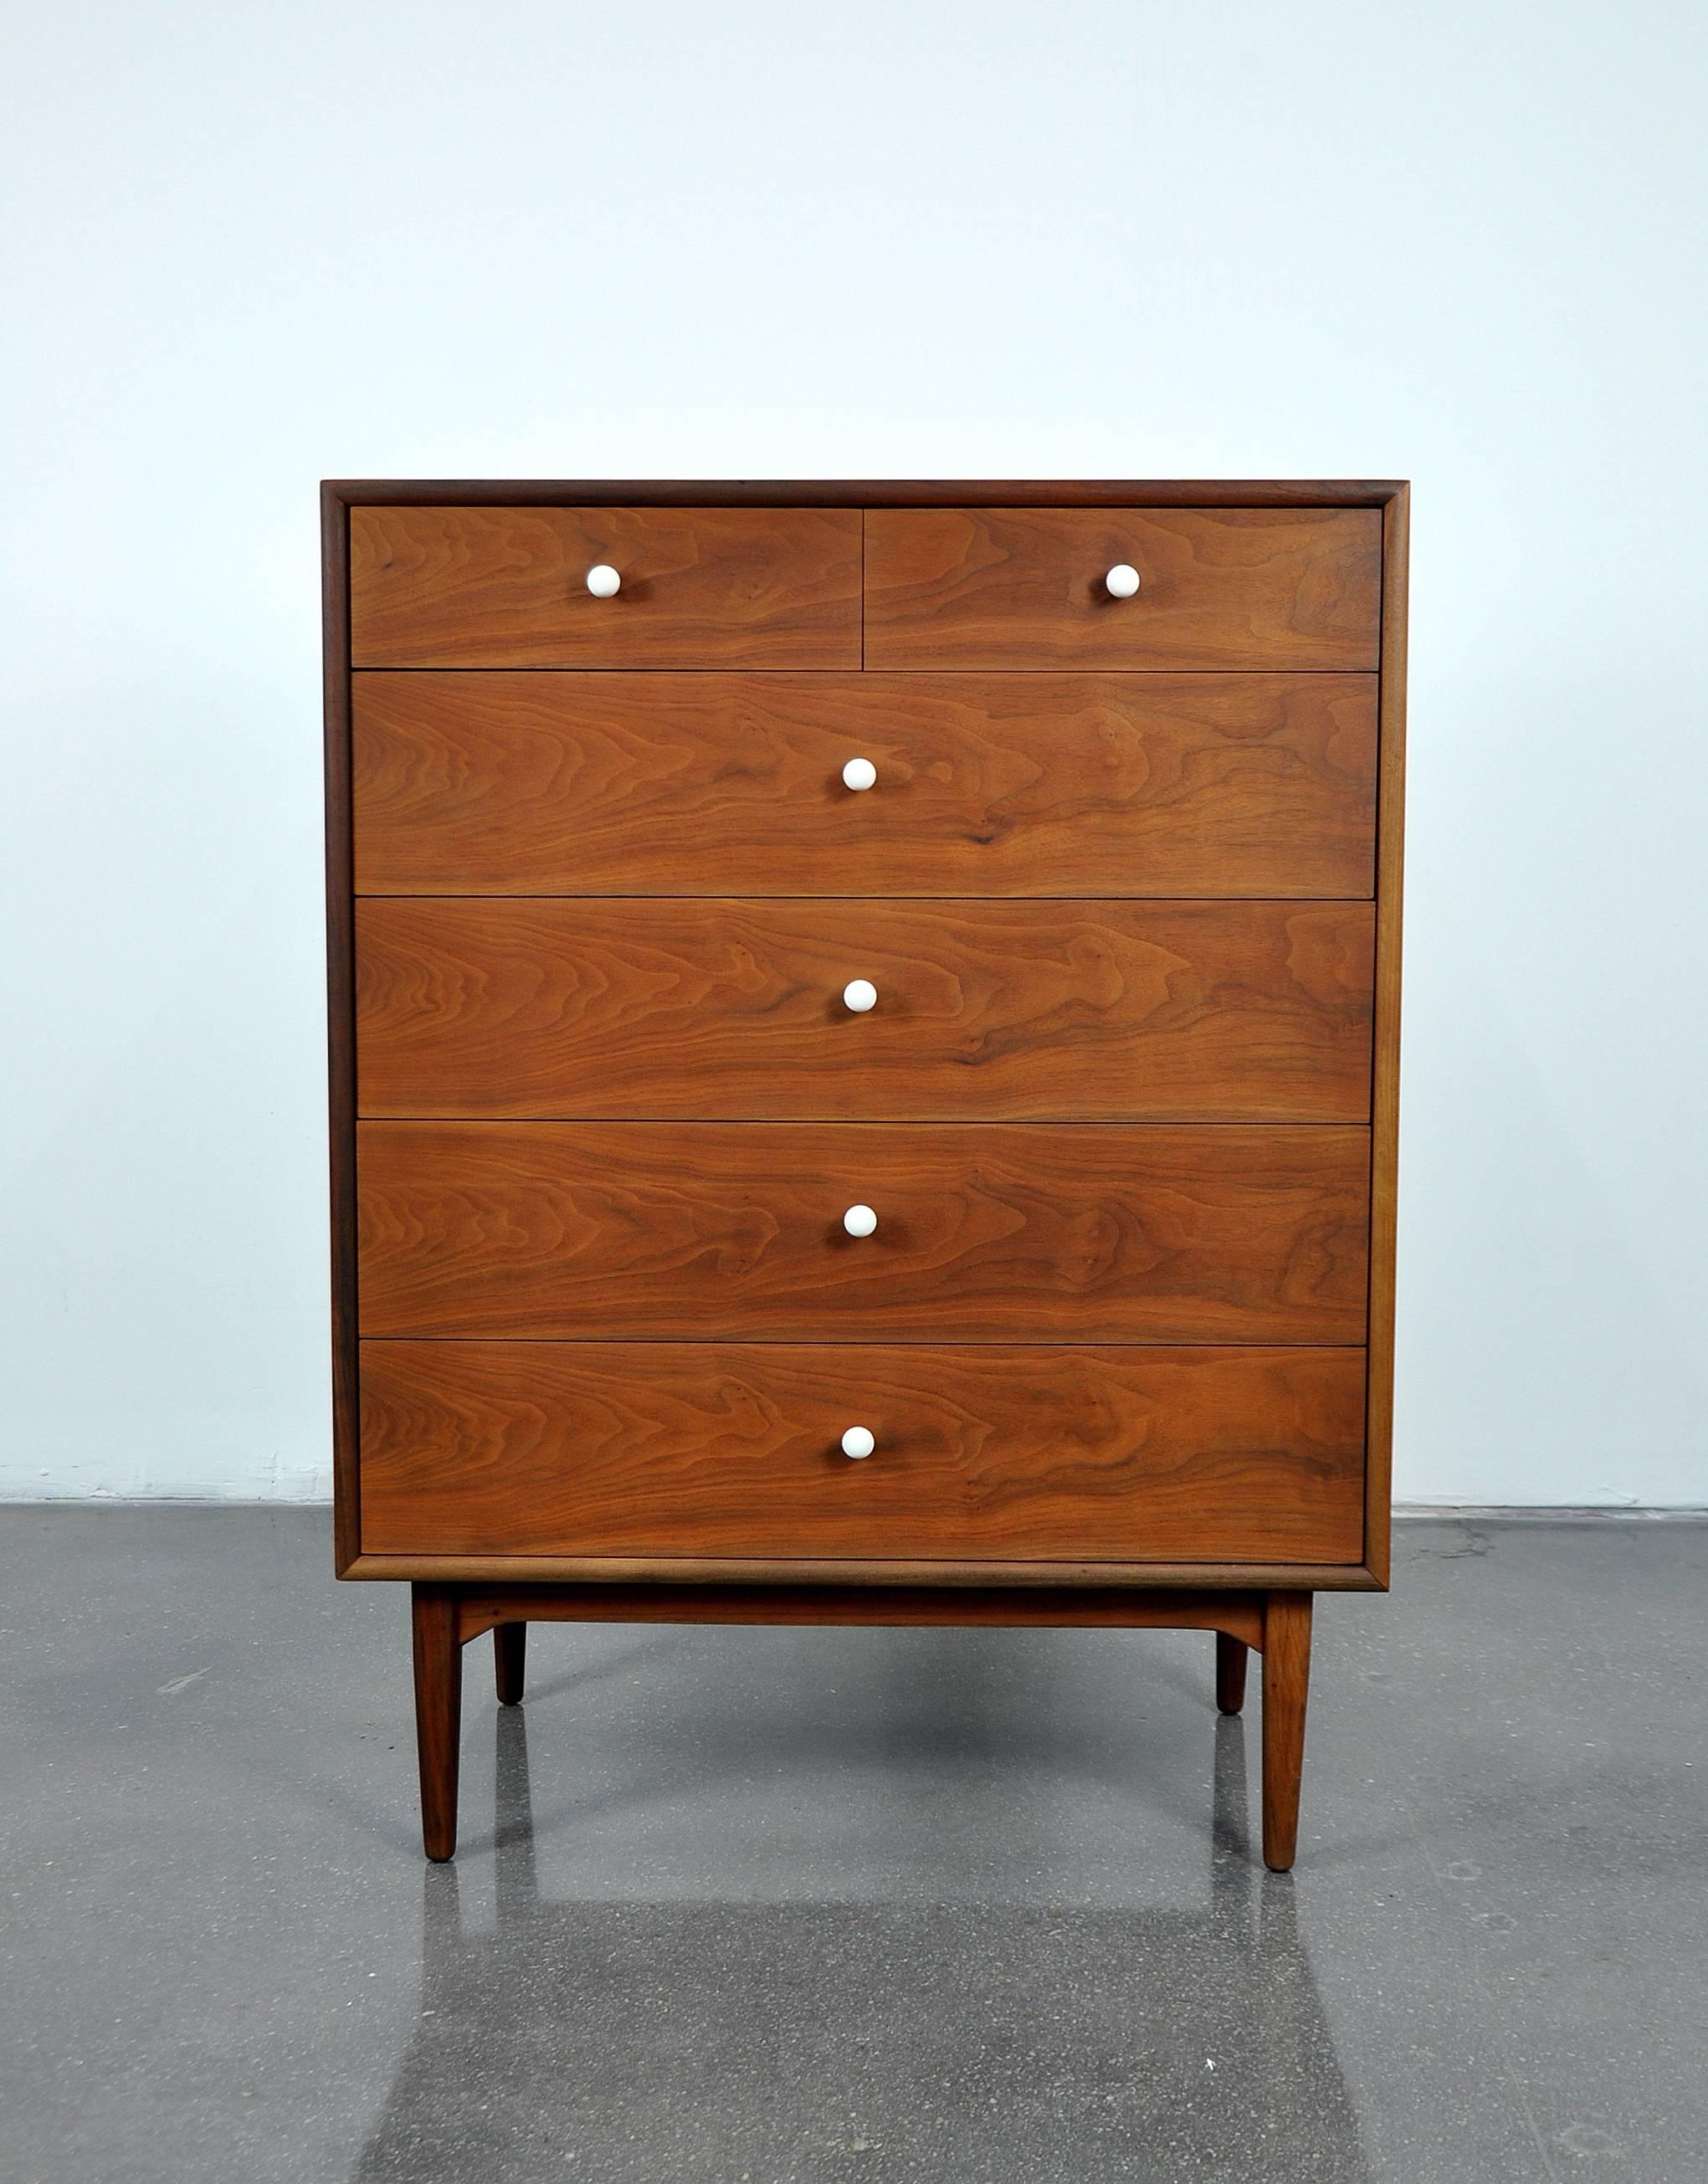 A beautiful Mid-Century Modern walnut highboy dresser from the desirable Declaration line designed by Kipp Stewart and Stewart MacDougall for Drexel in the 1950s. The beautifully grained walnut boasts striking patterns. The tall chest of drawers